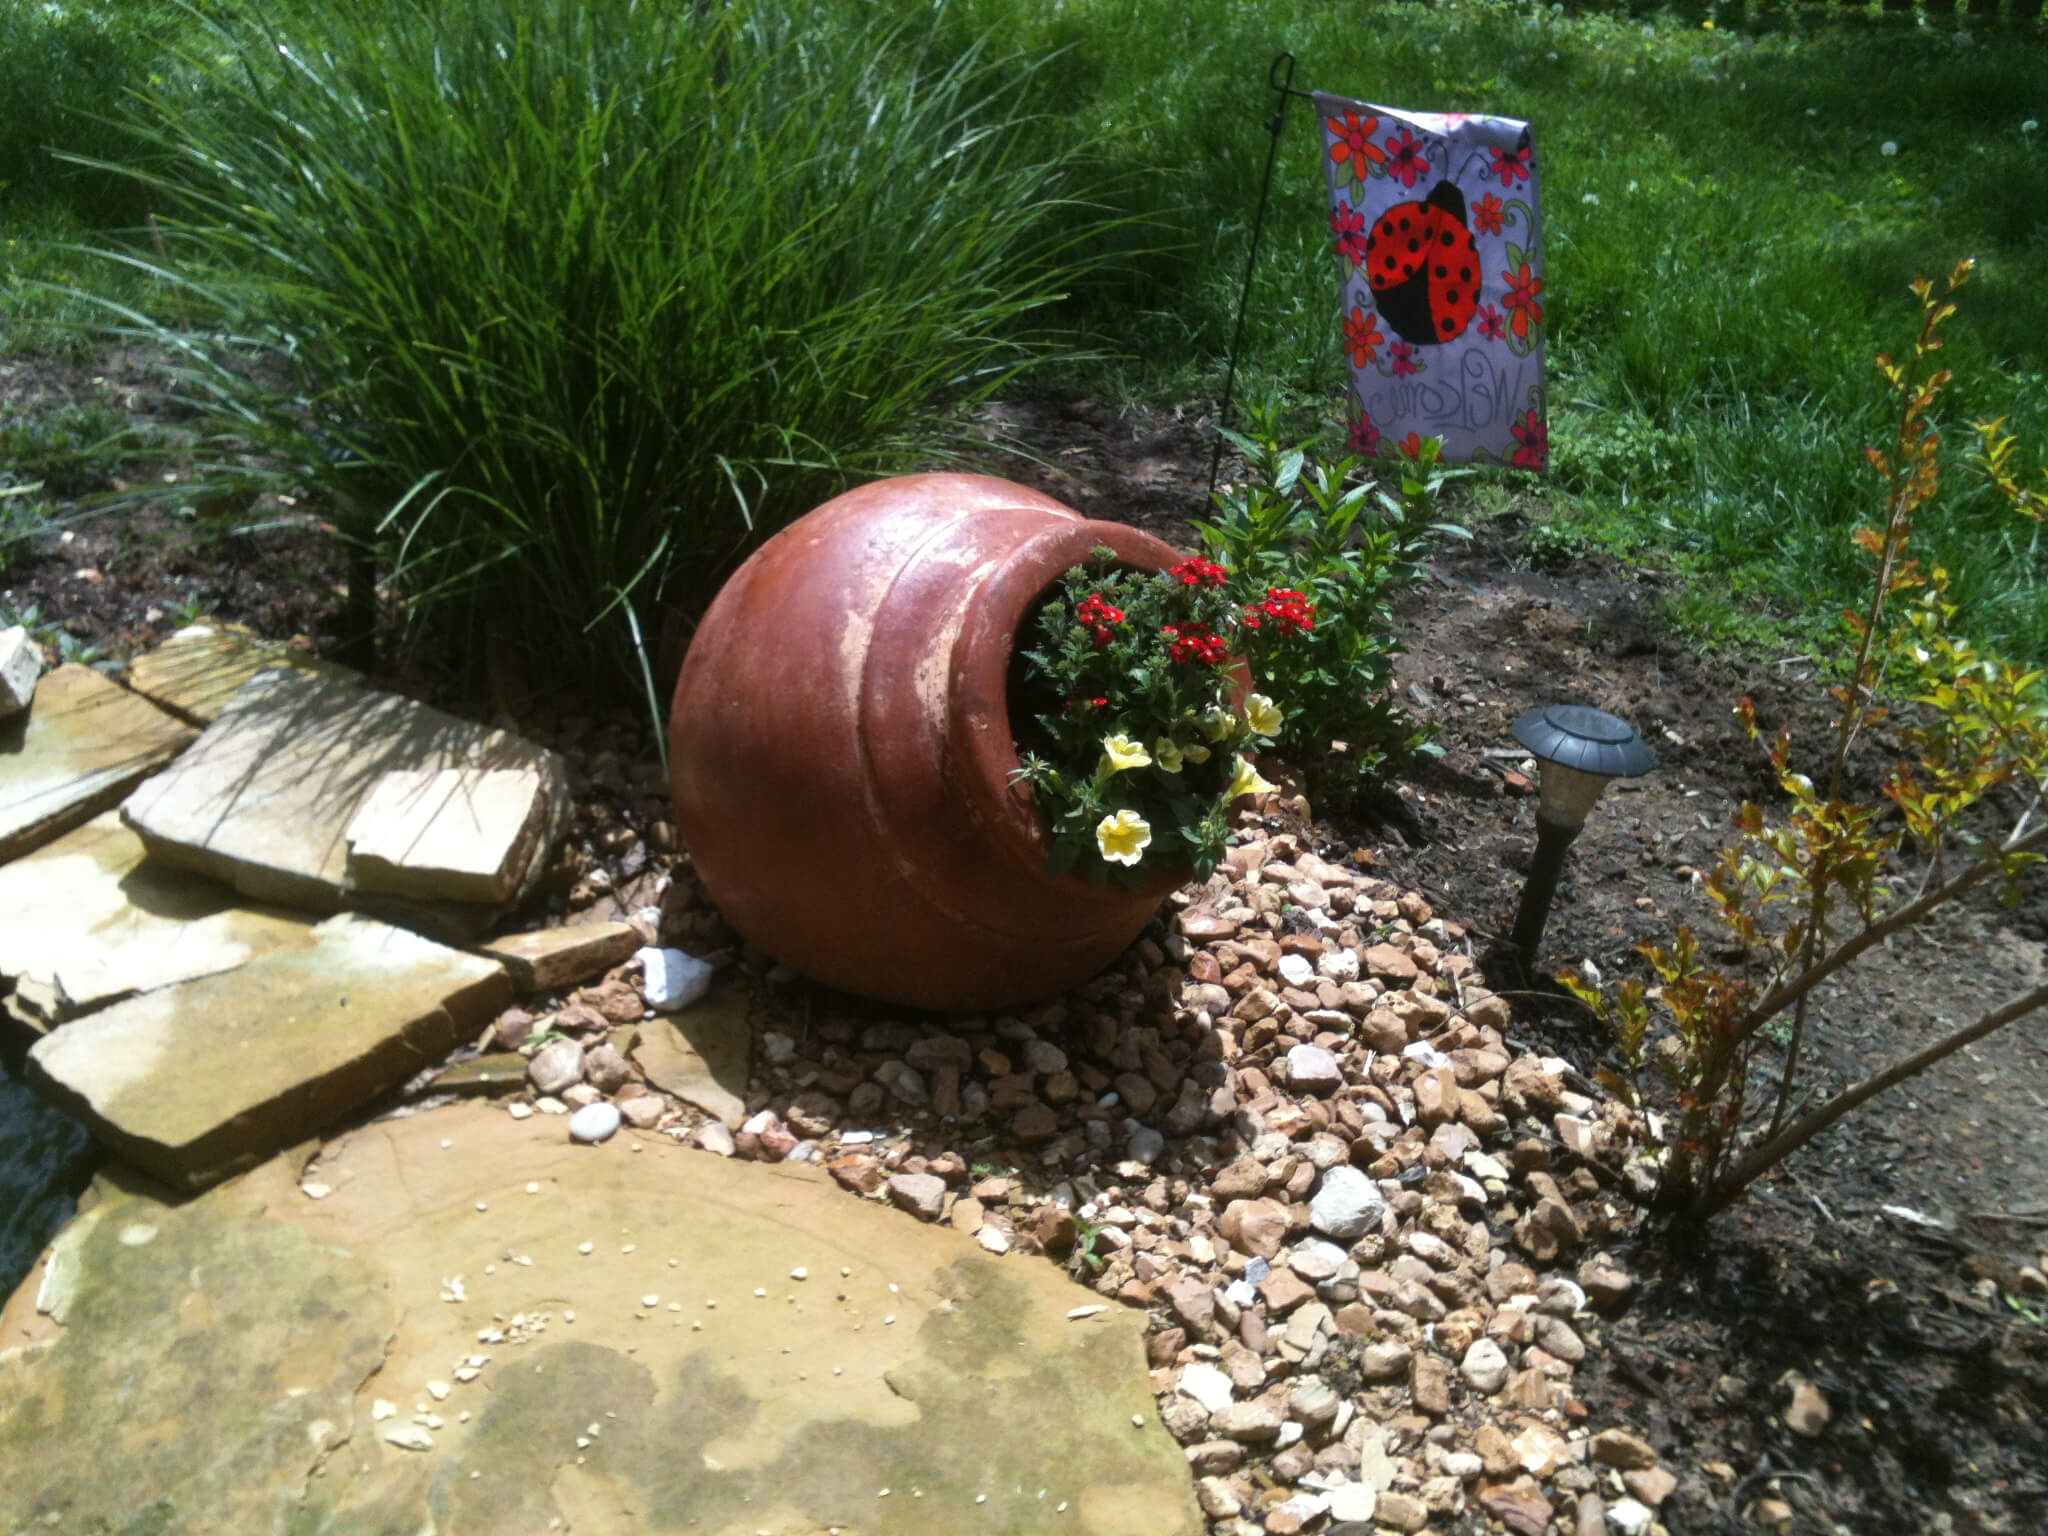 Tipped Pot with Bright Flowers